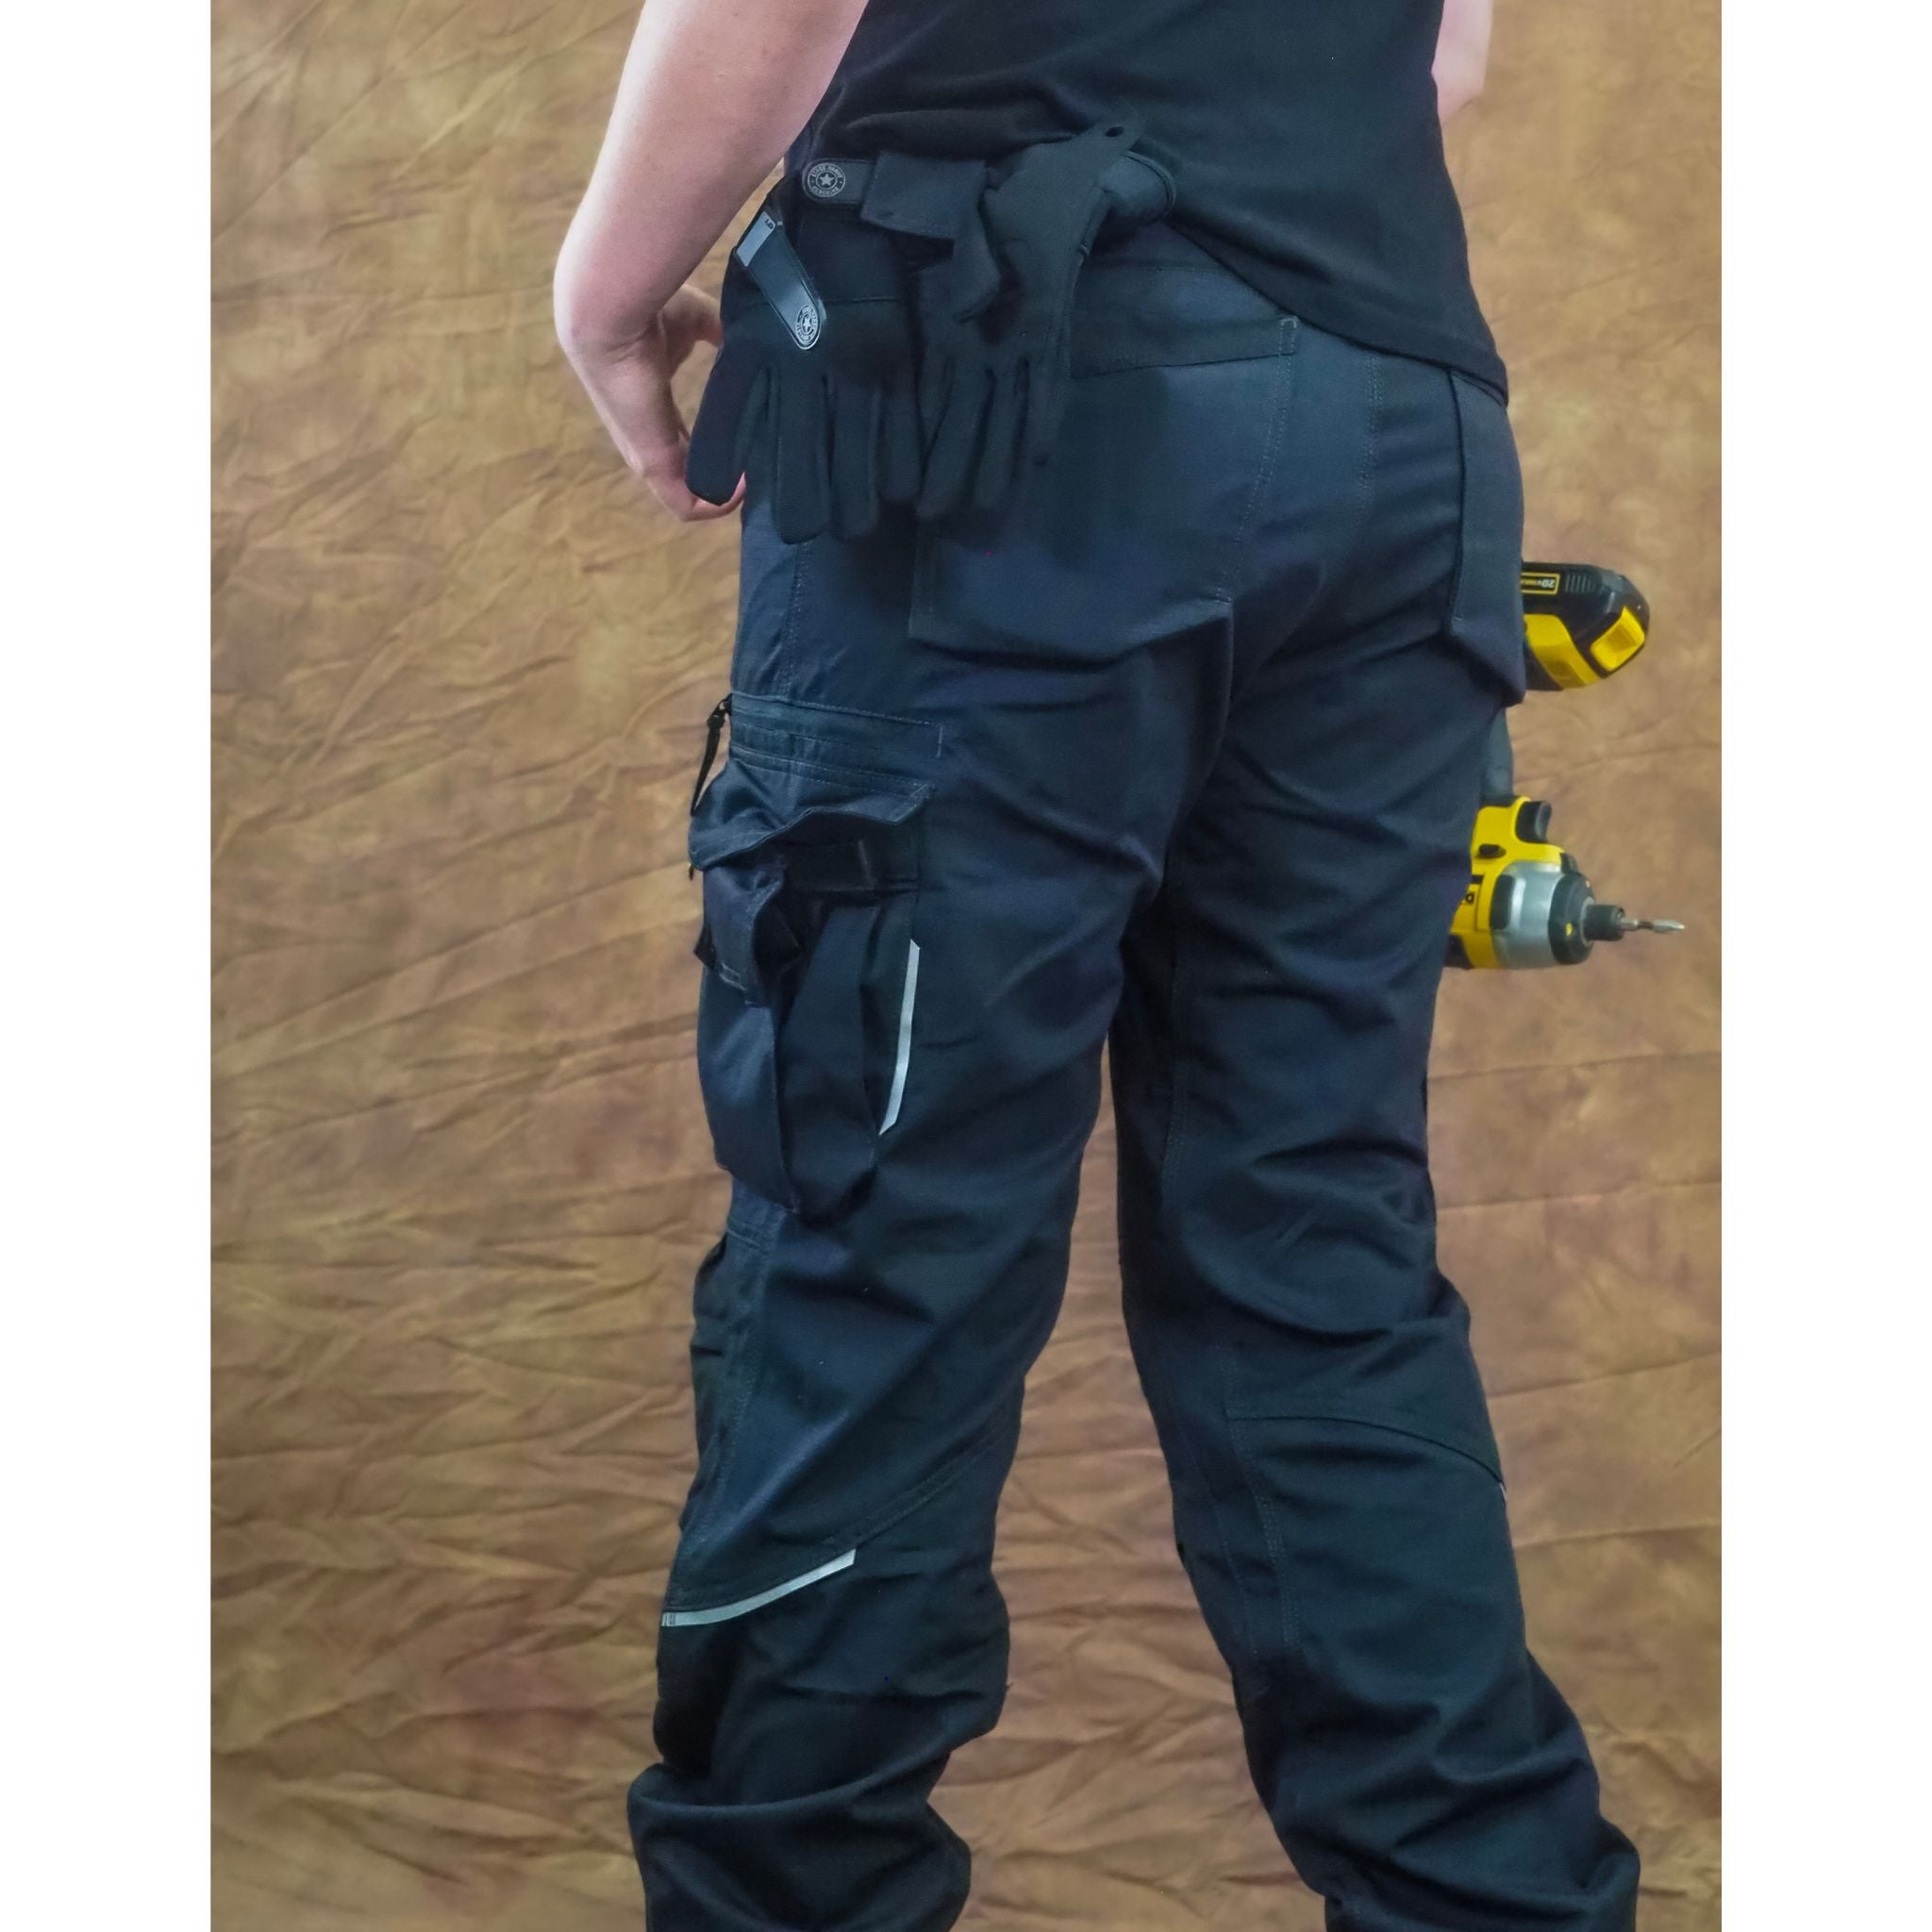 Women's black work pants with tool pockets